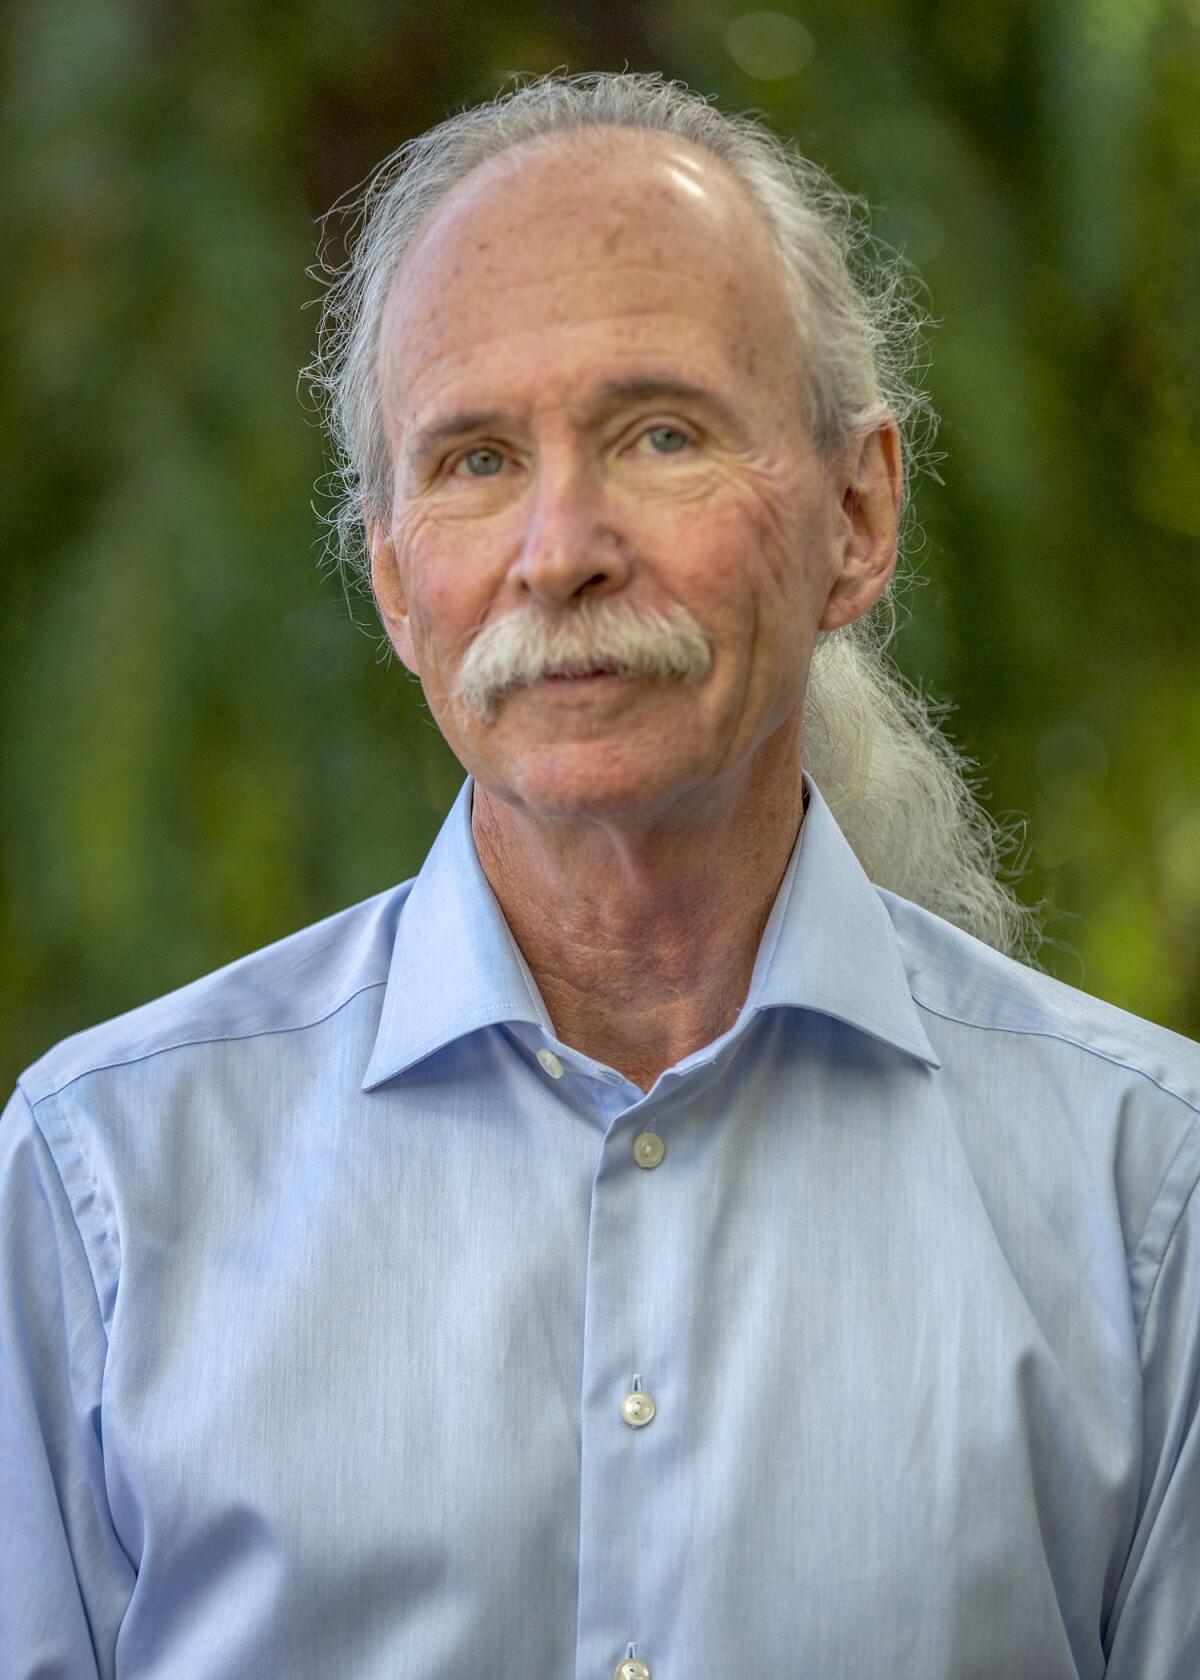 A man with long white hair and a mustache.